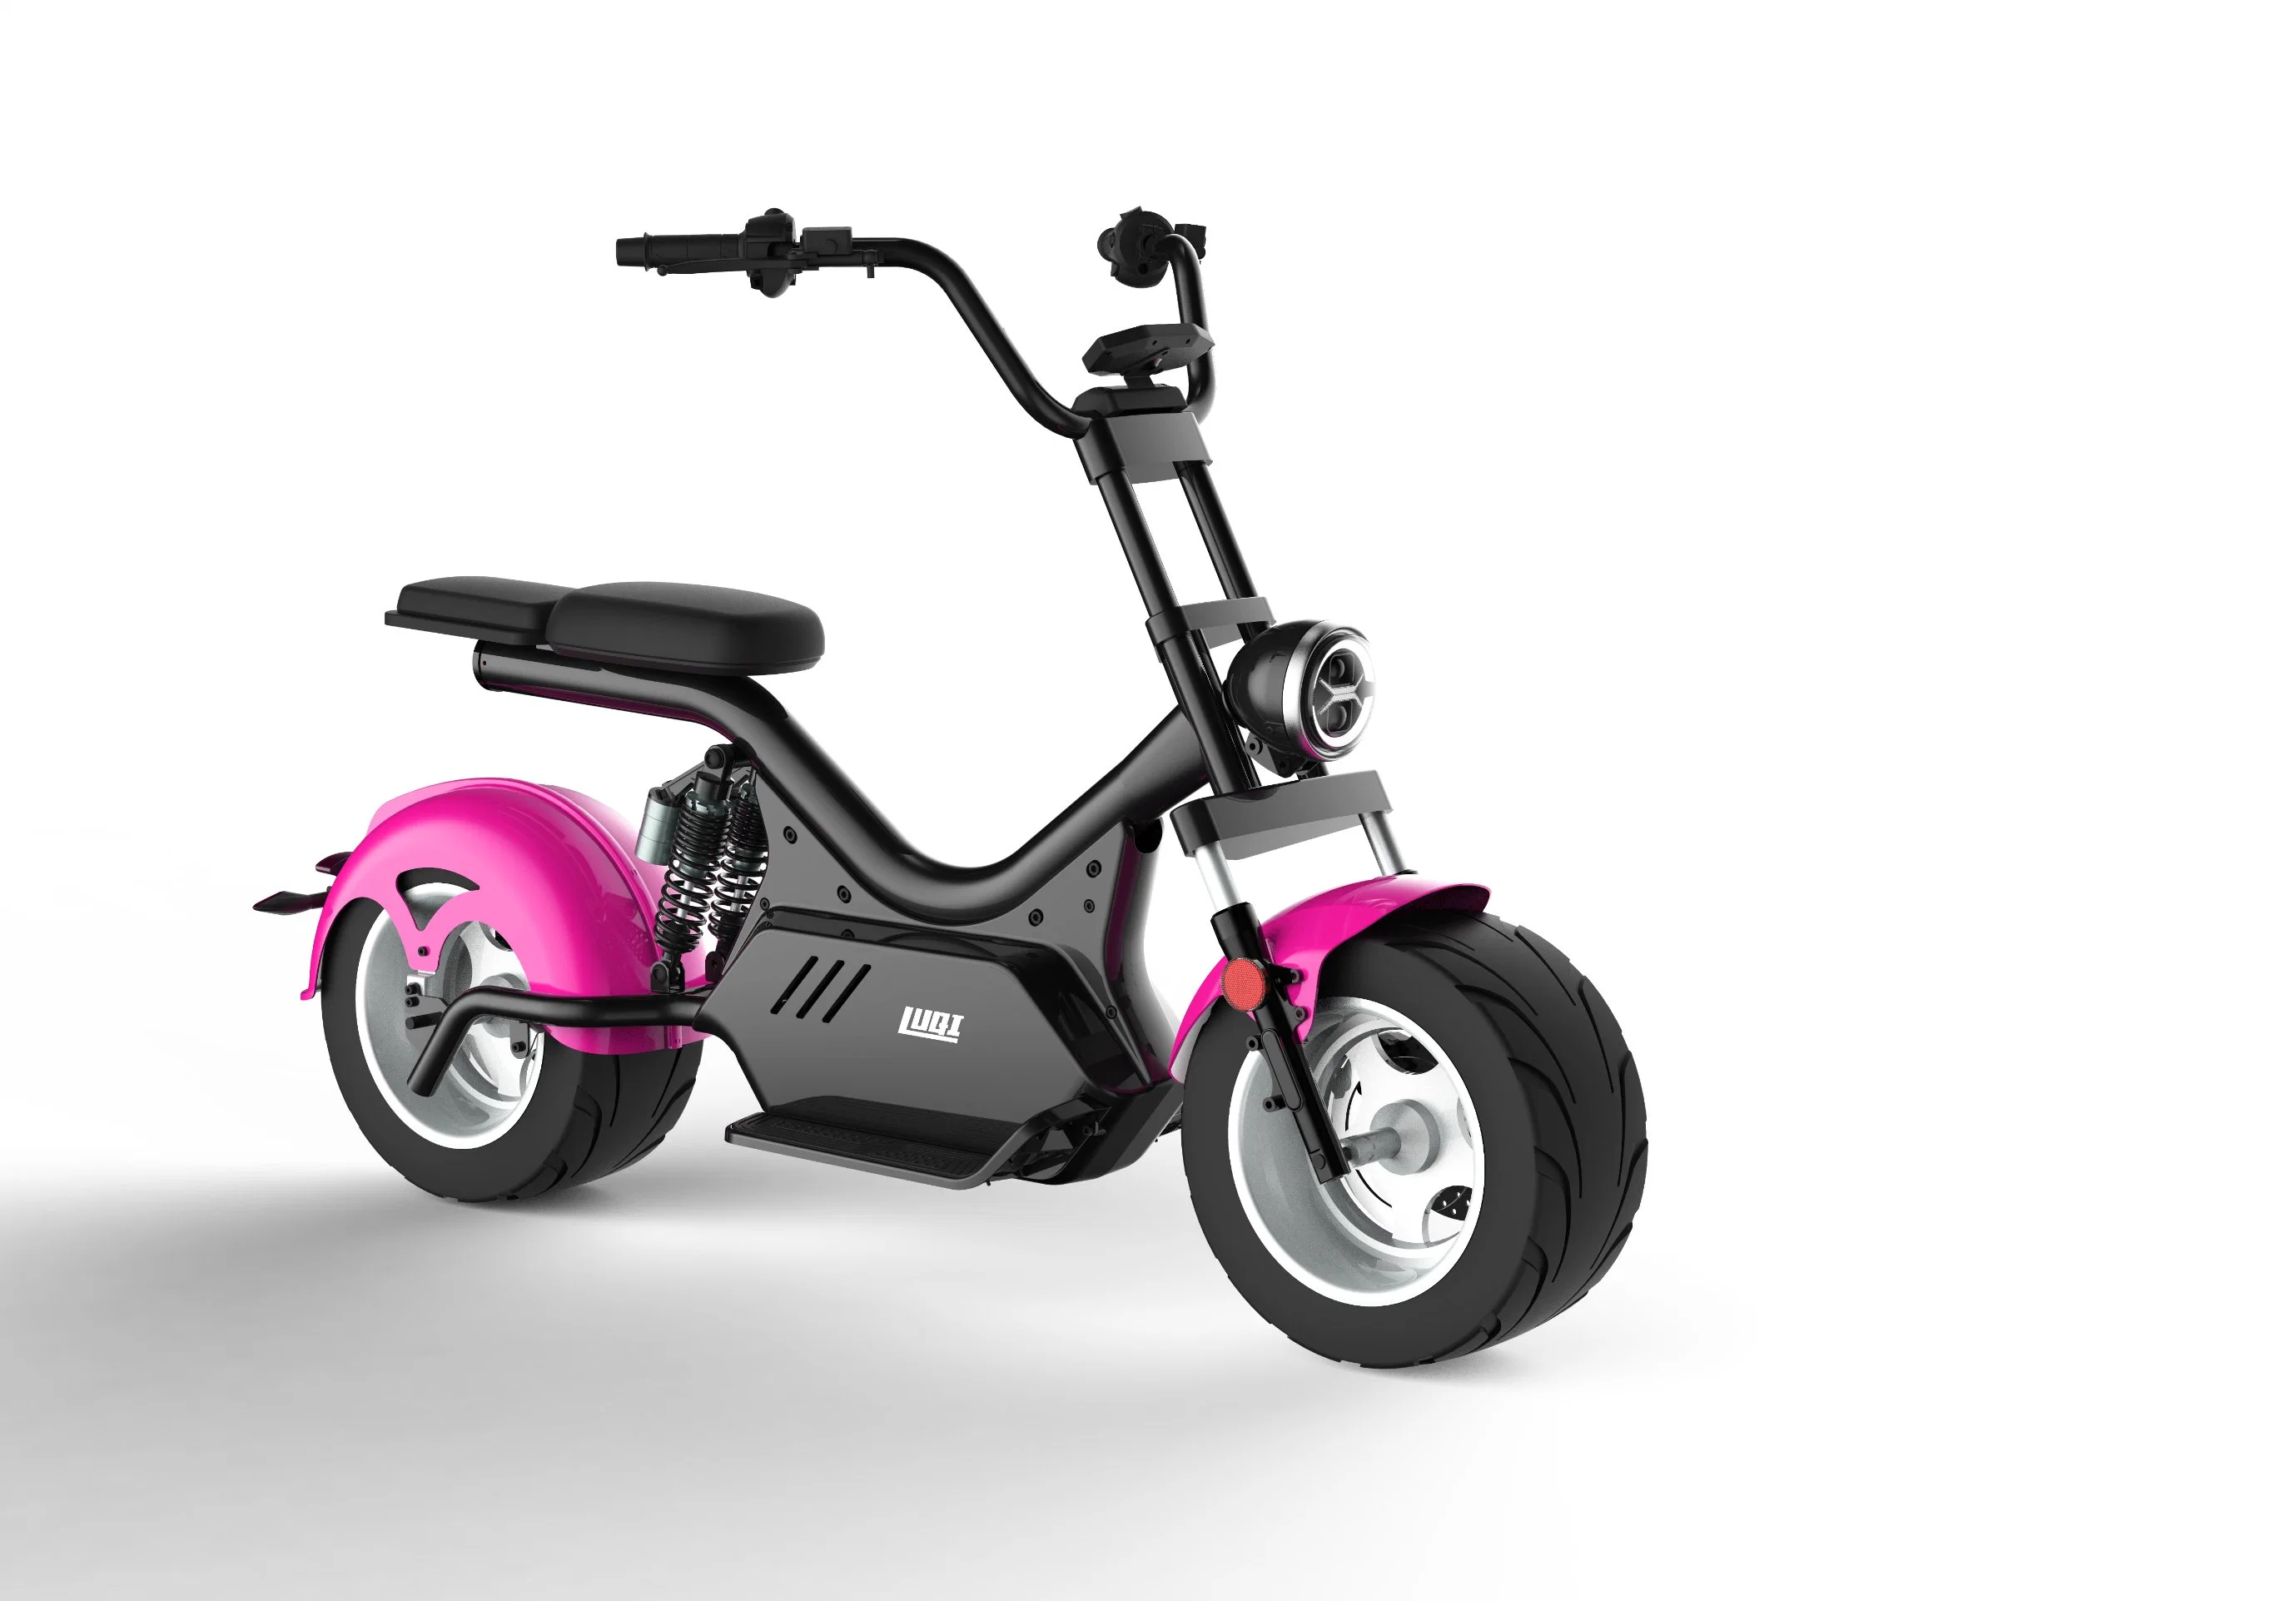 2000W Brushless Motor Cycle Charge EEC Vespa Electric Scooter